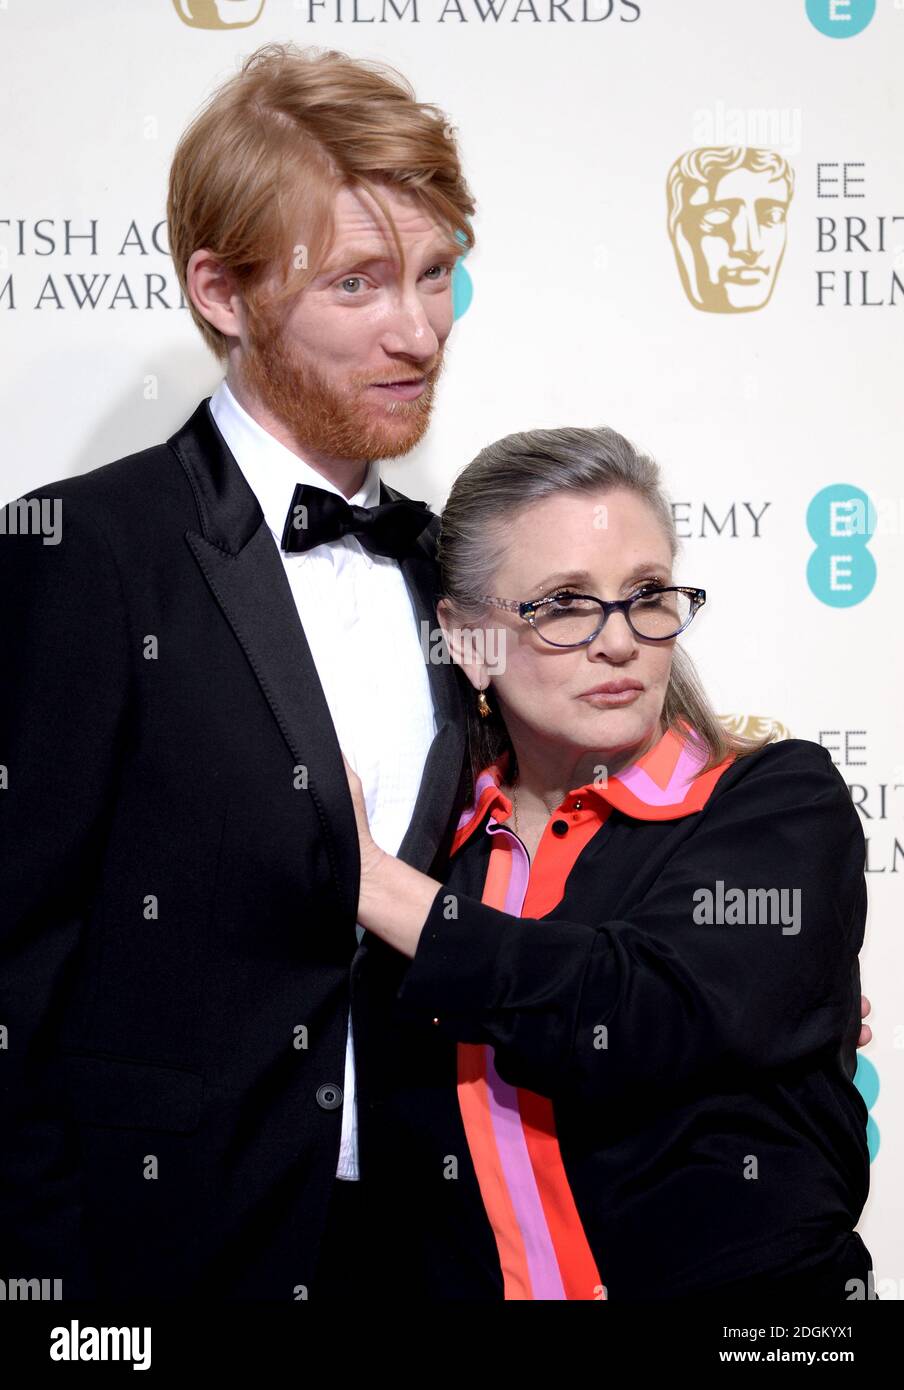 Domhnall Gleeson and Carrie Fisher in the press room during the EE British Academy Film Awards at the Royal Opera House, Bow Street, London.  EMPICS Entertainment Photo. Picture date: Sunday February 14, 2016. Photo credit should read: Doug Peters/ EMPICS Entertainment Stock Photo